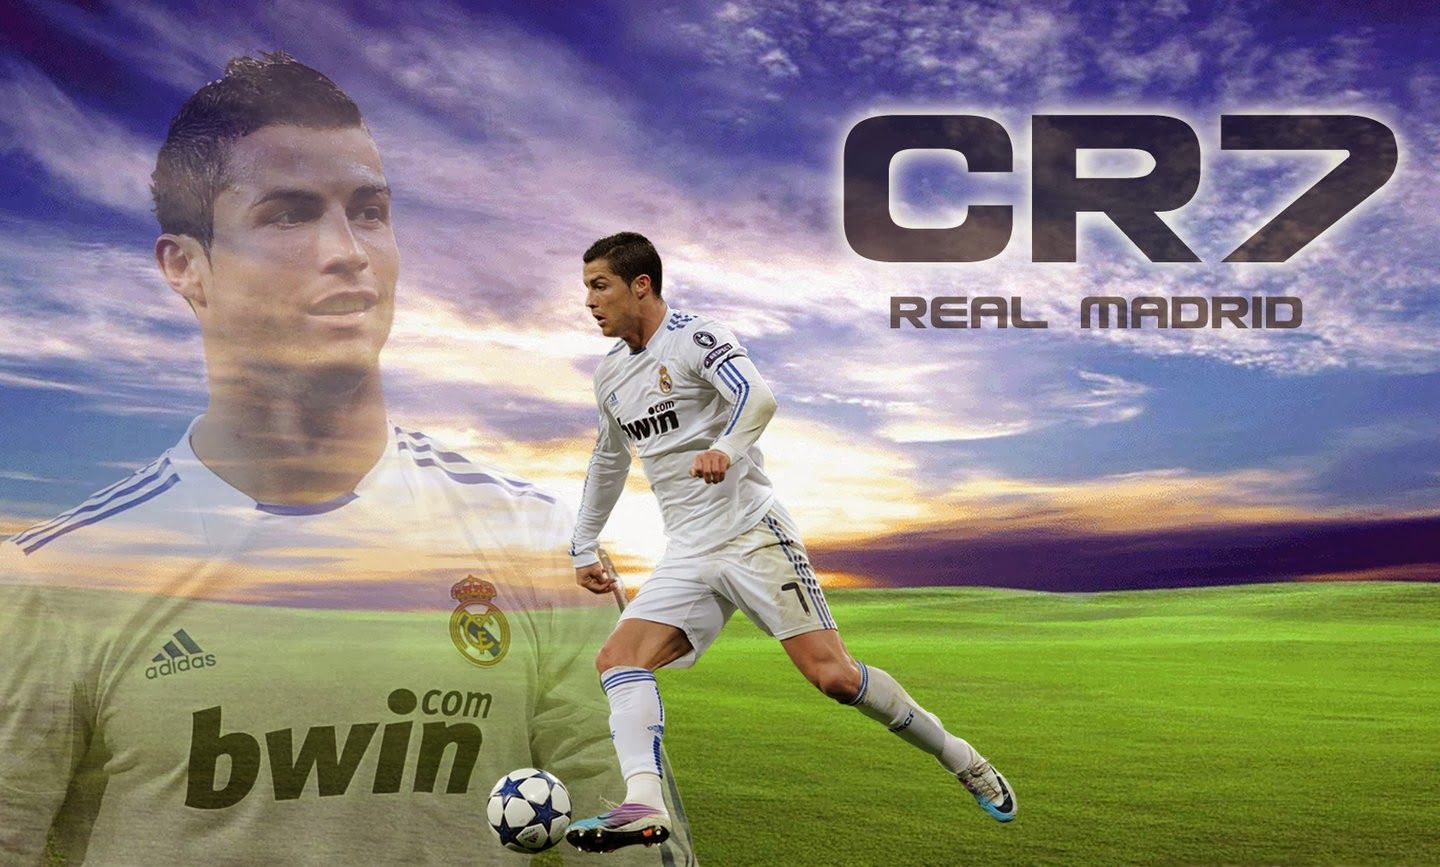 Cr7 And Bale HD Wallpaper For Your